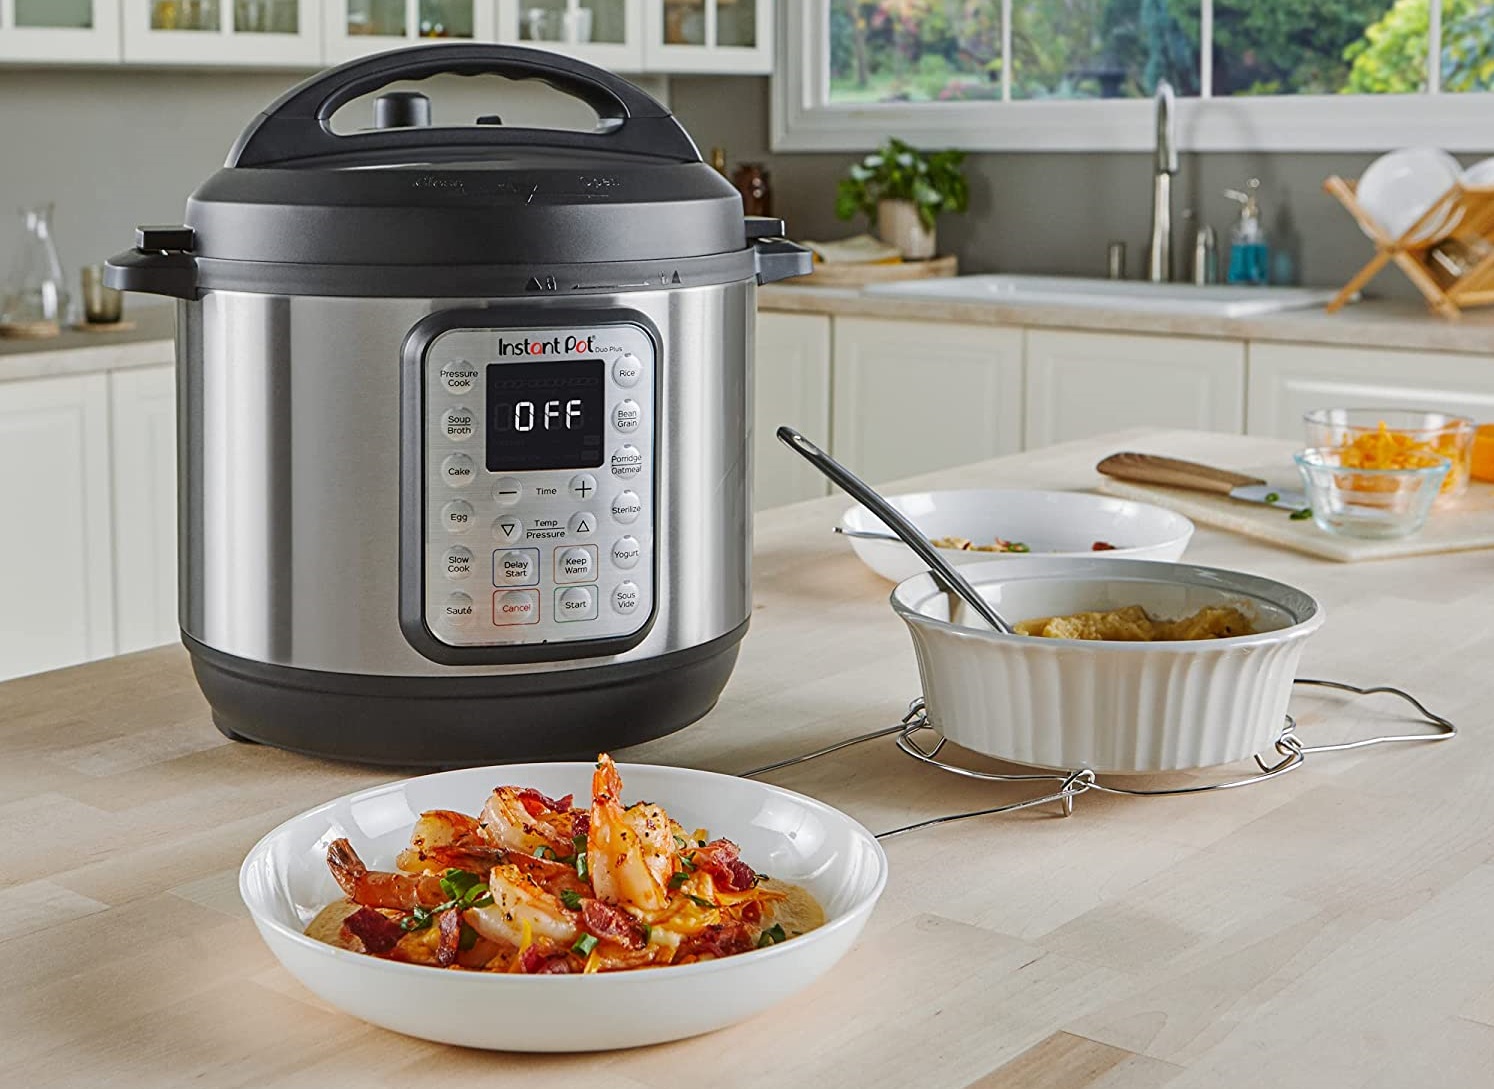 https://www.digitaltrends.com/wp-content/uploads/2021/06/instant-pot-duo-plus-multi-cooker-on-the-counter.jpg?p=1